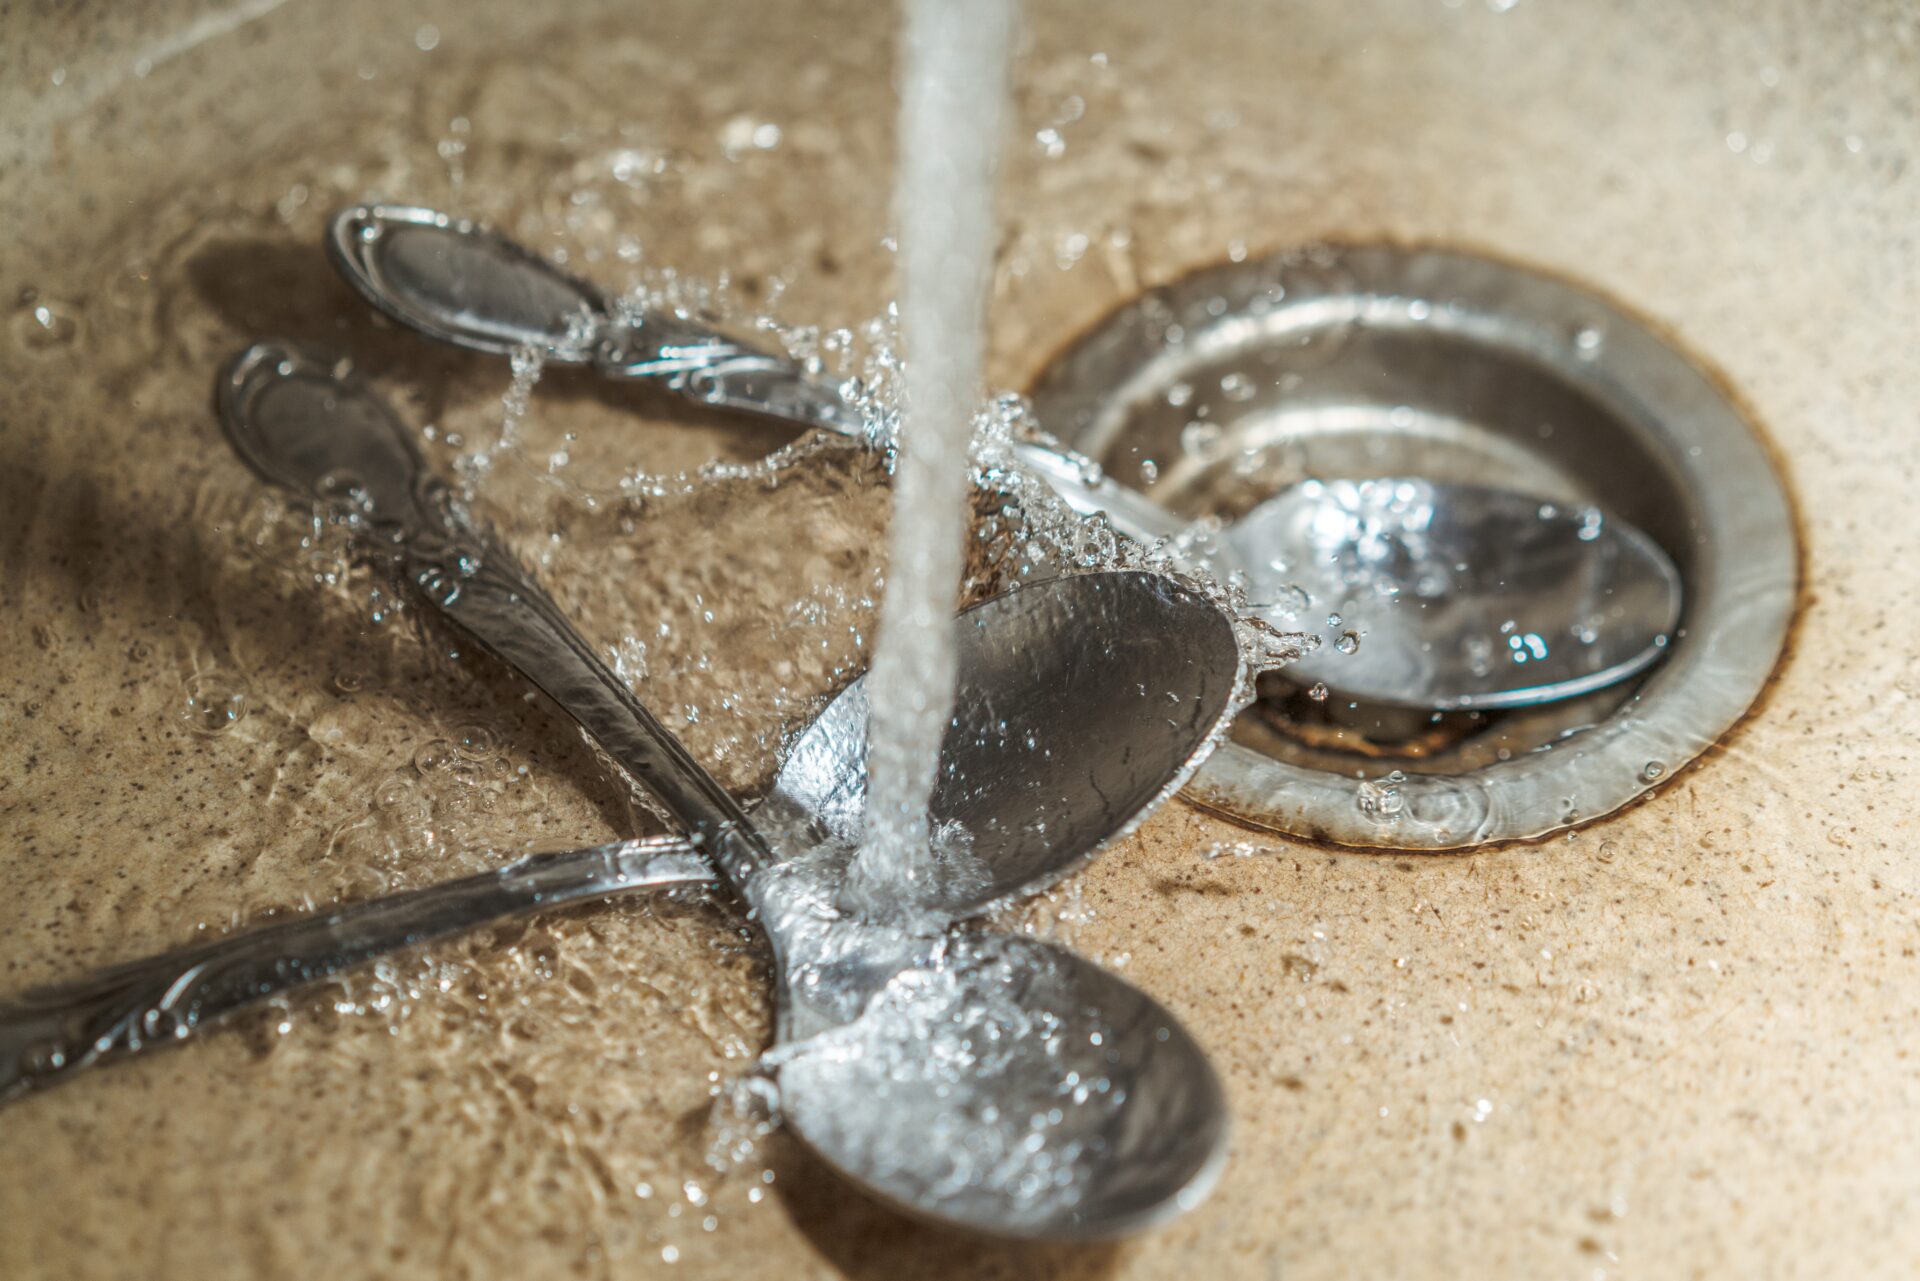 Safeguard Your Home’s Plumbing with Expert Water Leak Detection and Repair Services